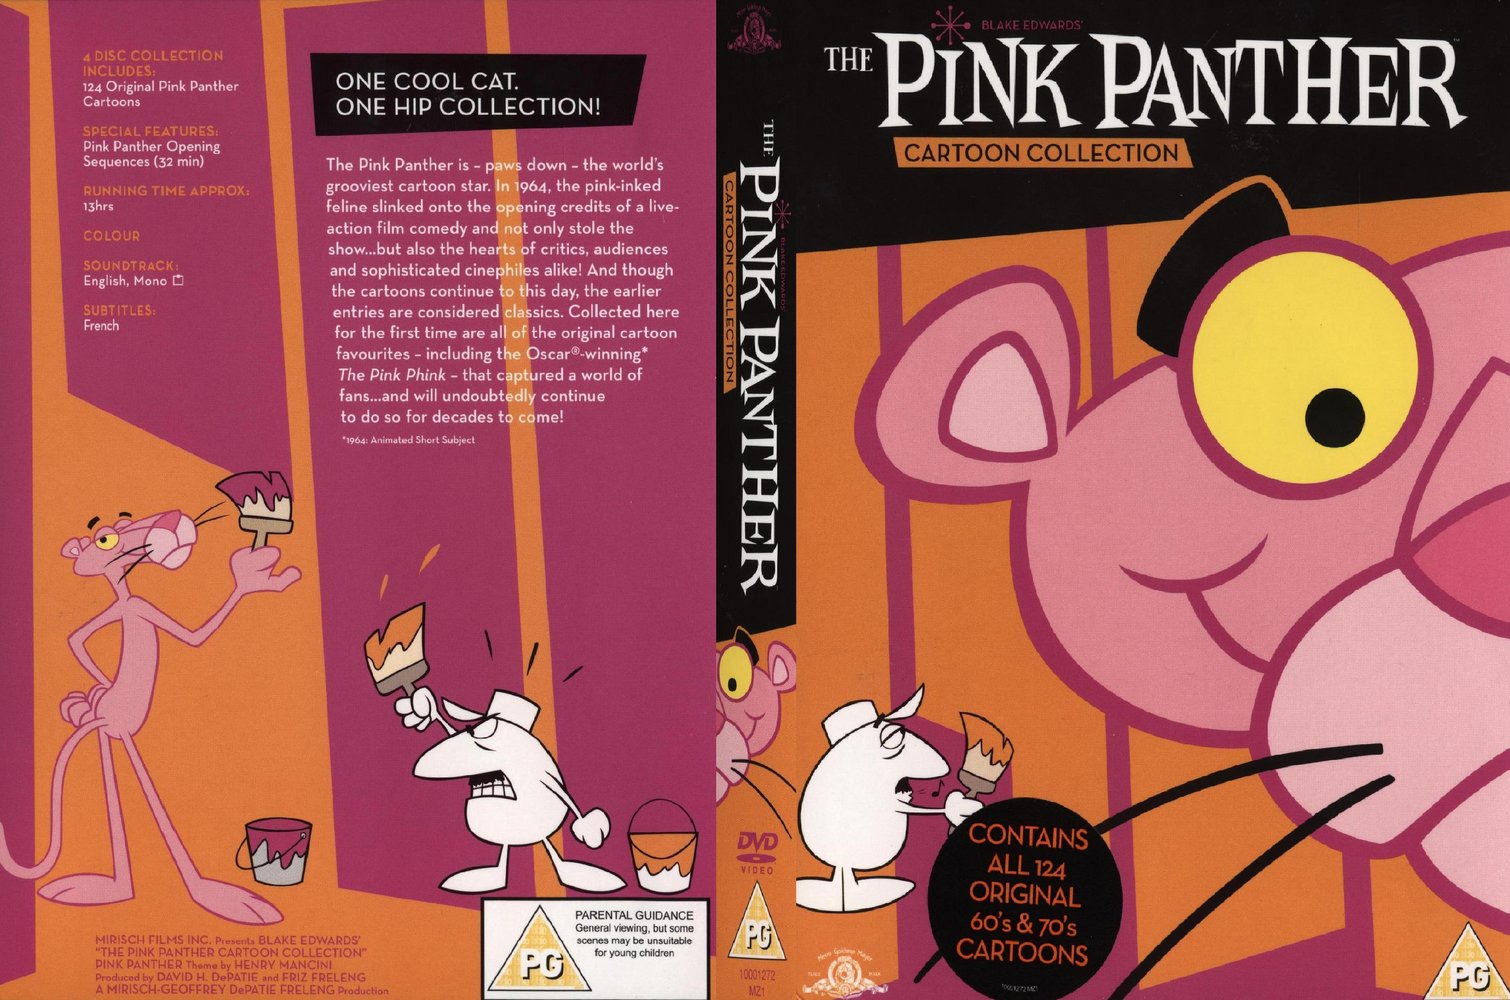 Covers Box Sk Pink Panther Show The 1969 High.